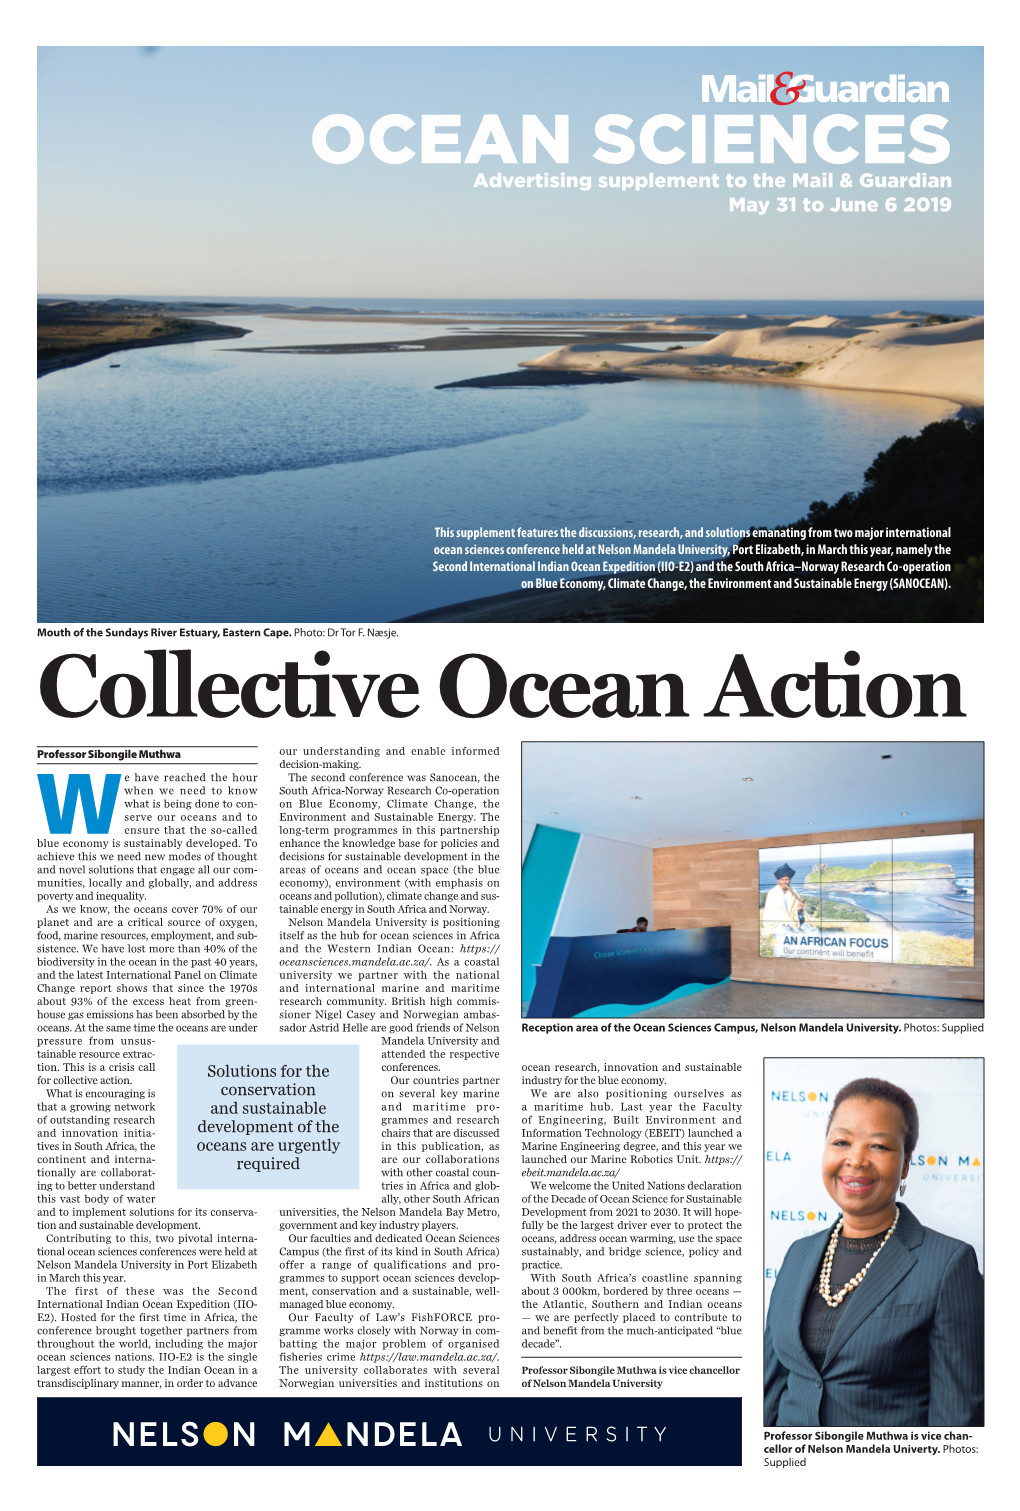 OCEAN SCIENCES Advertising Supplement to the Mail & Guardian May 31 to June 6 2019